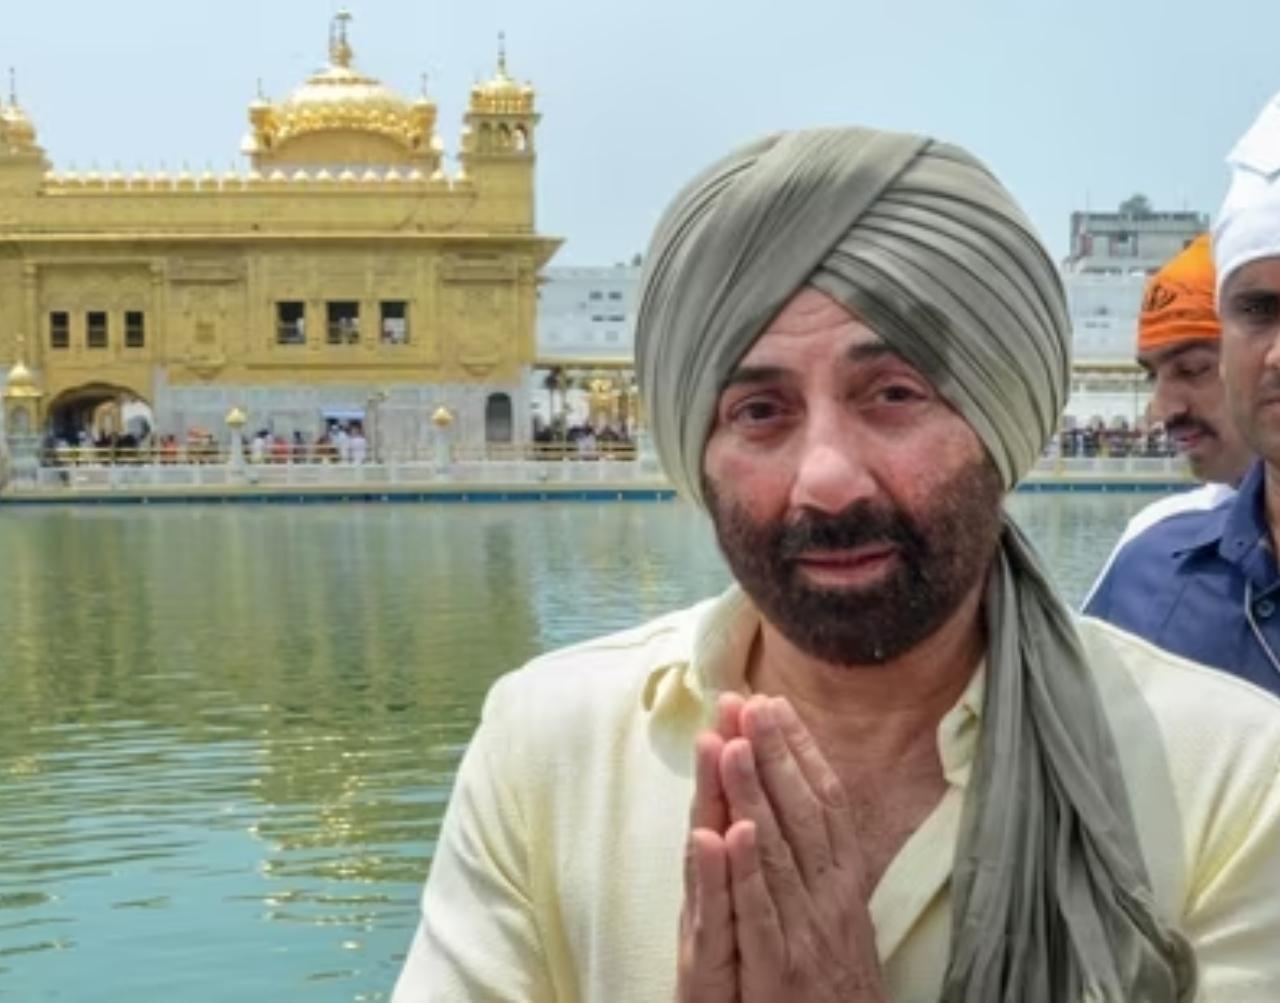 Sunny Deol sought blessings at the Golden Temple during the promotions of his blockbuster film, Gadar 2 (Source/Pallav Paliwal)